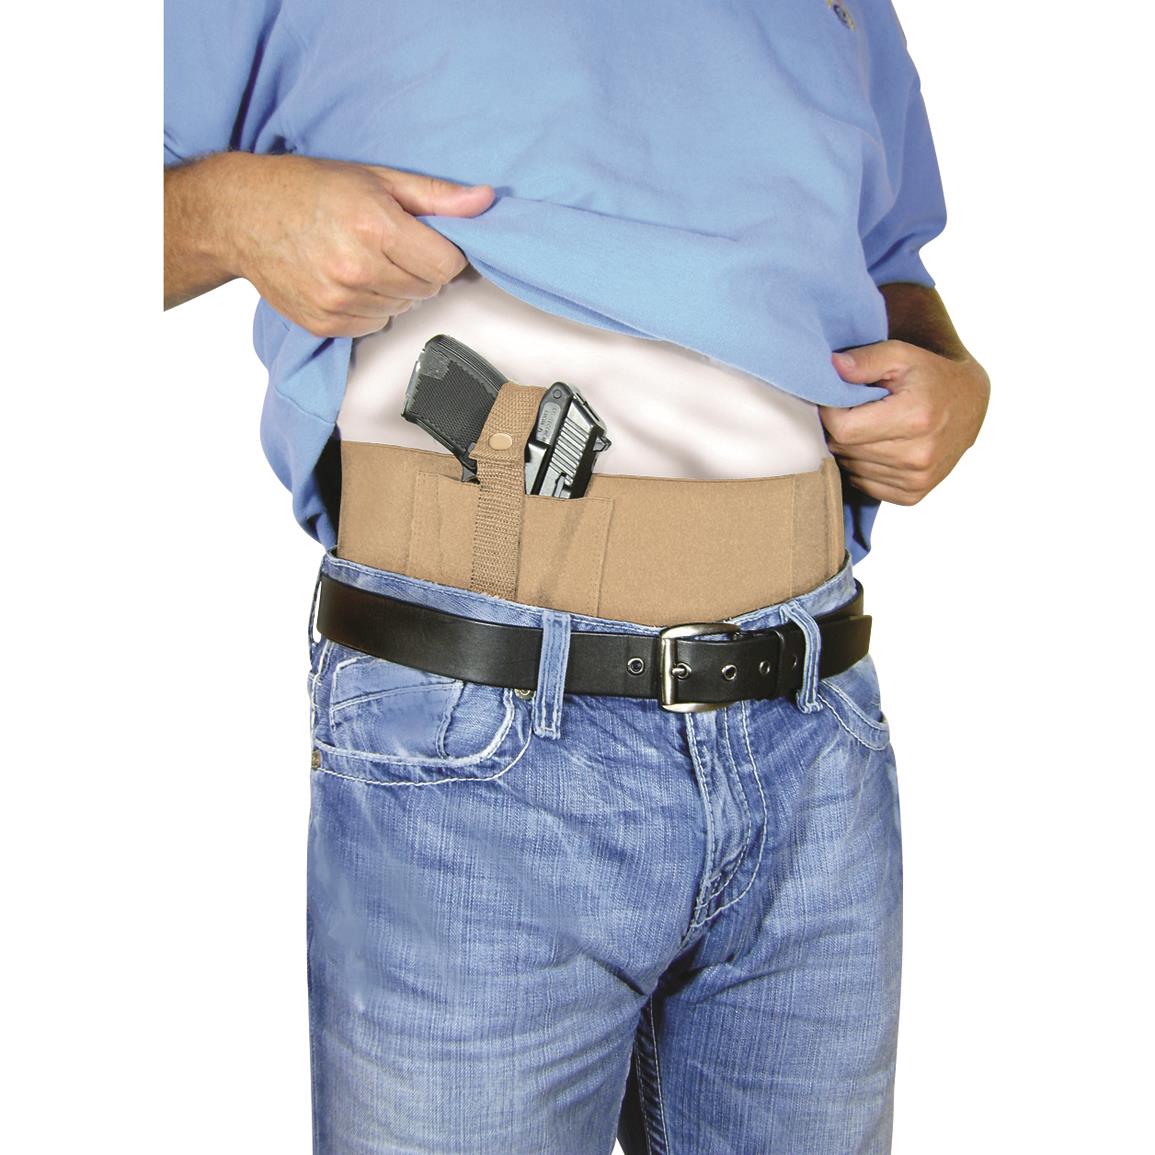 Concealed Carry Belly Band, 28" to 34" Waist